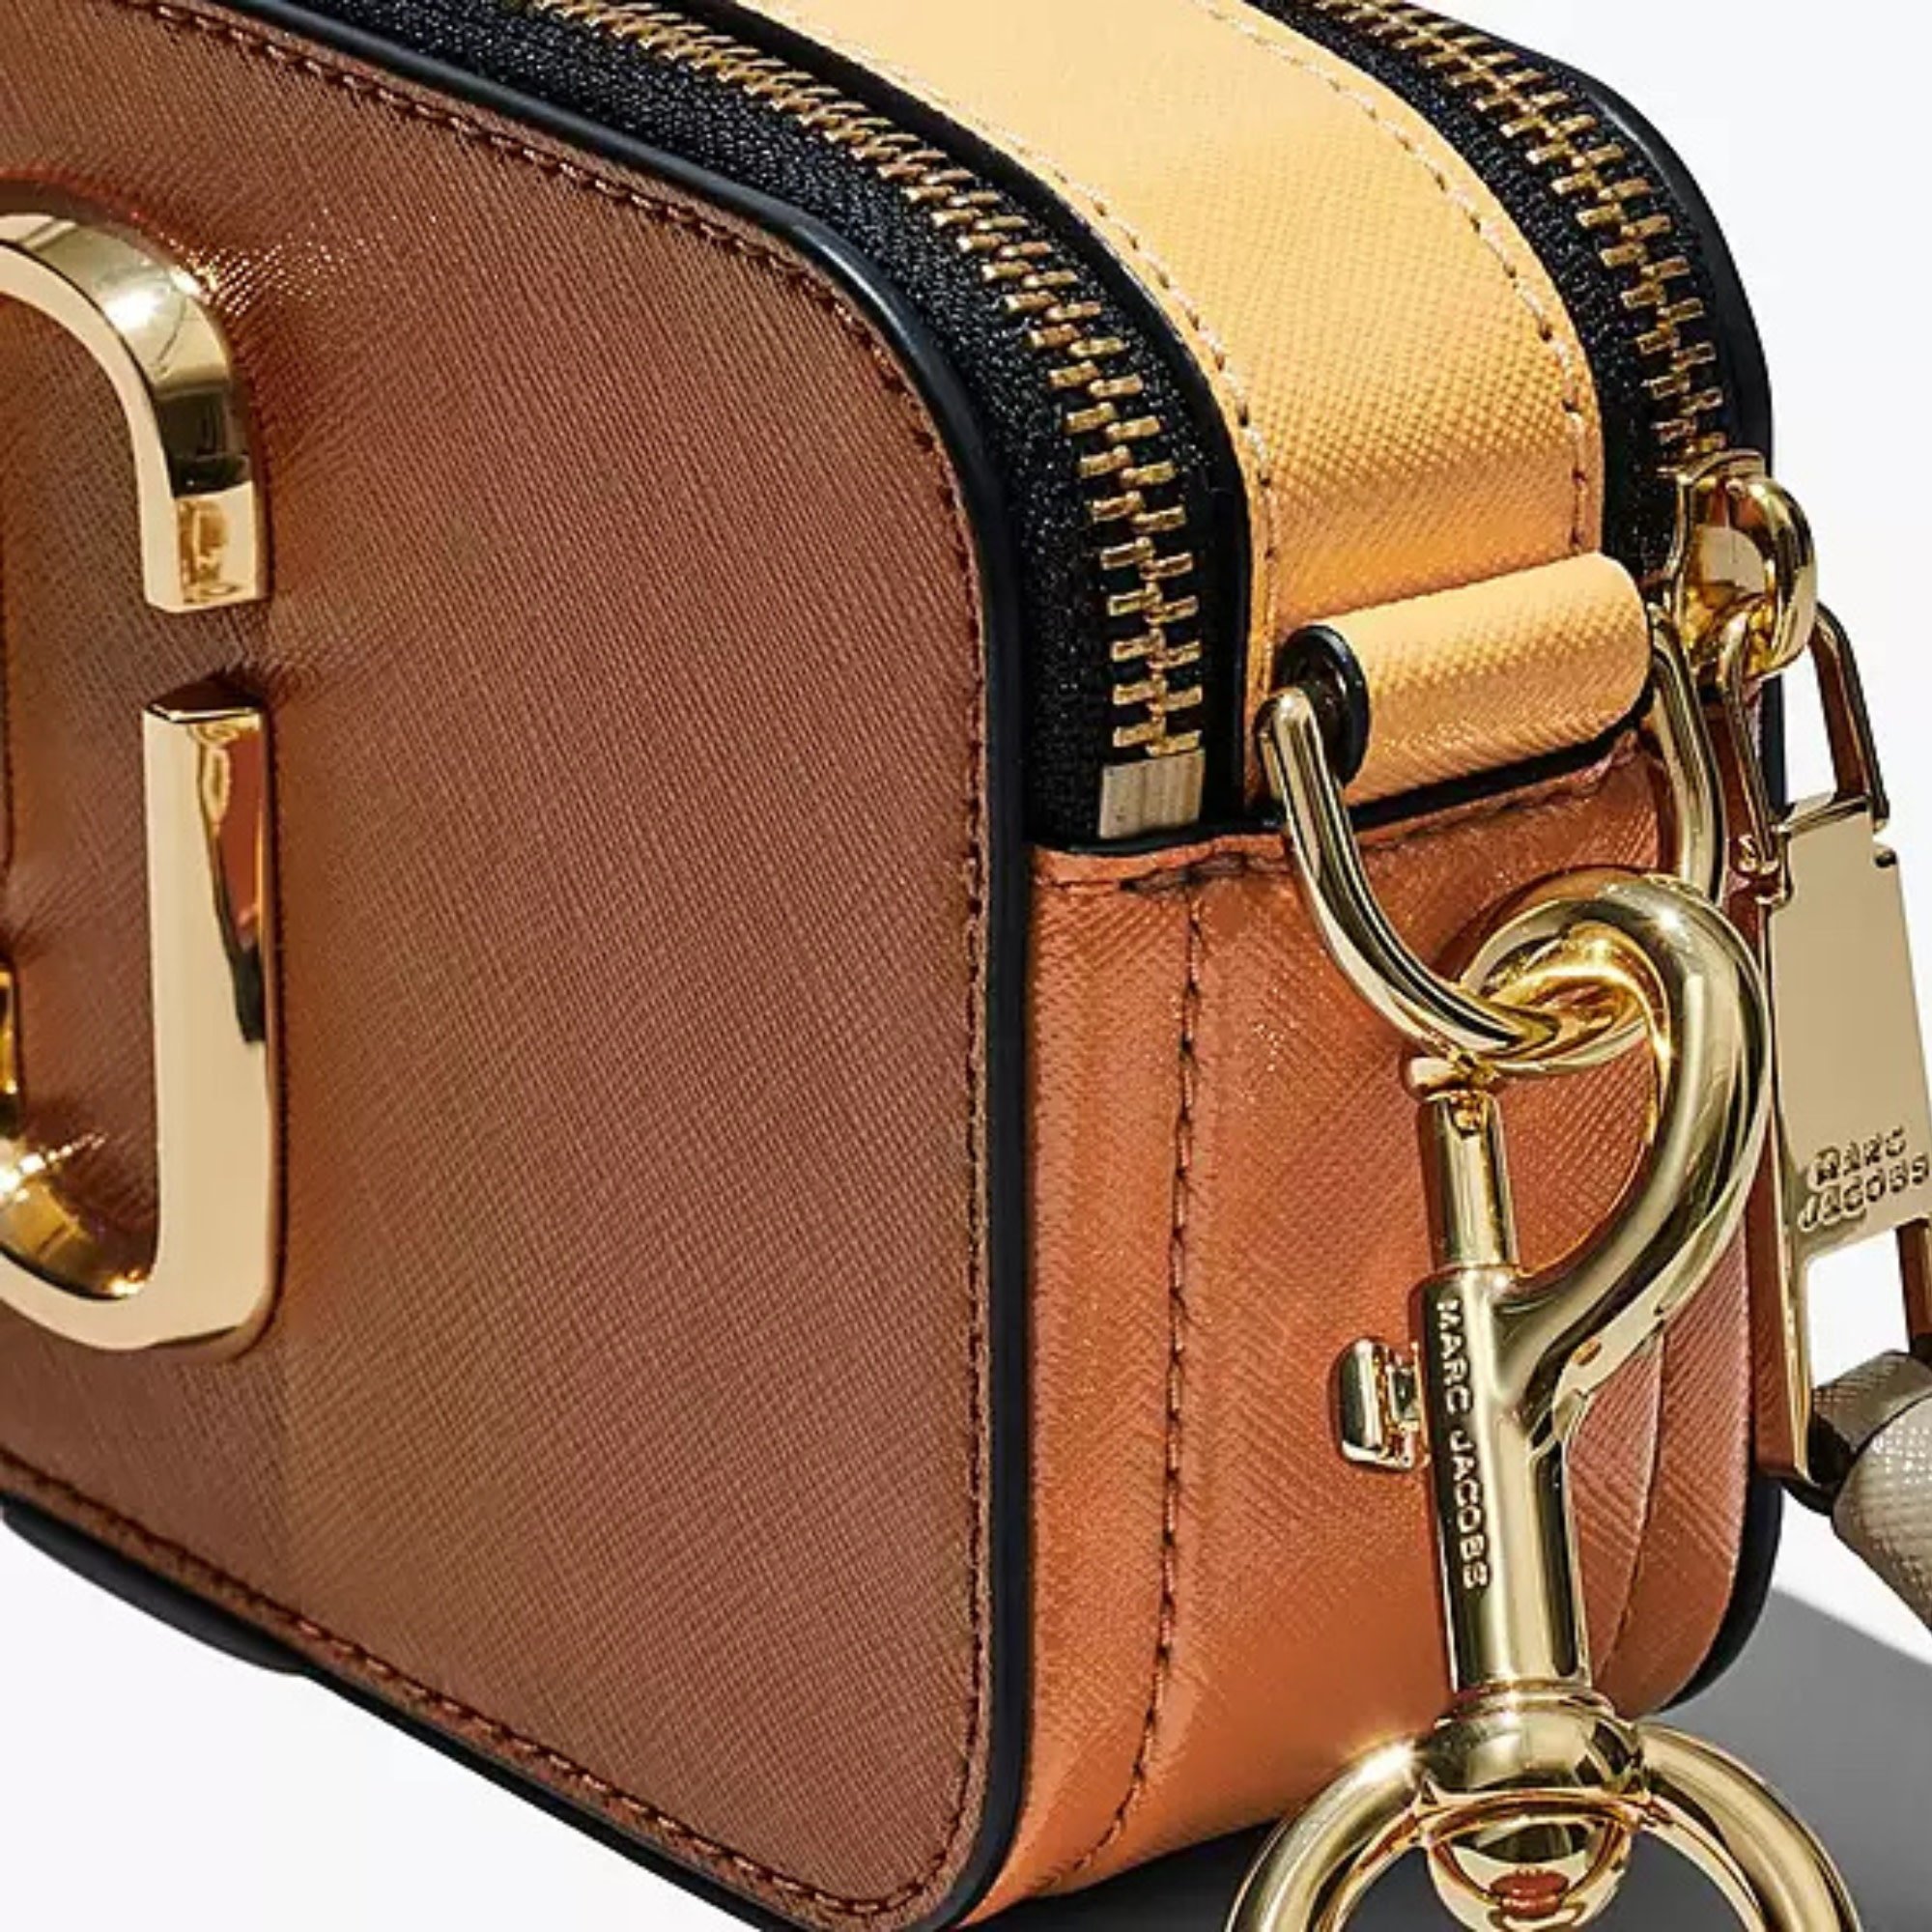 MARC JACOBS: The Snapshot Saffiano leather bag - Brown